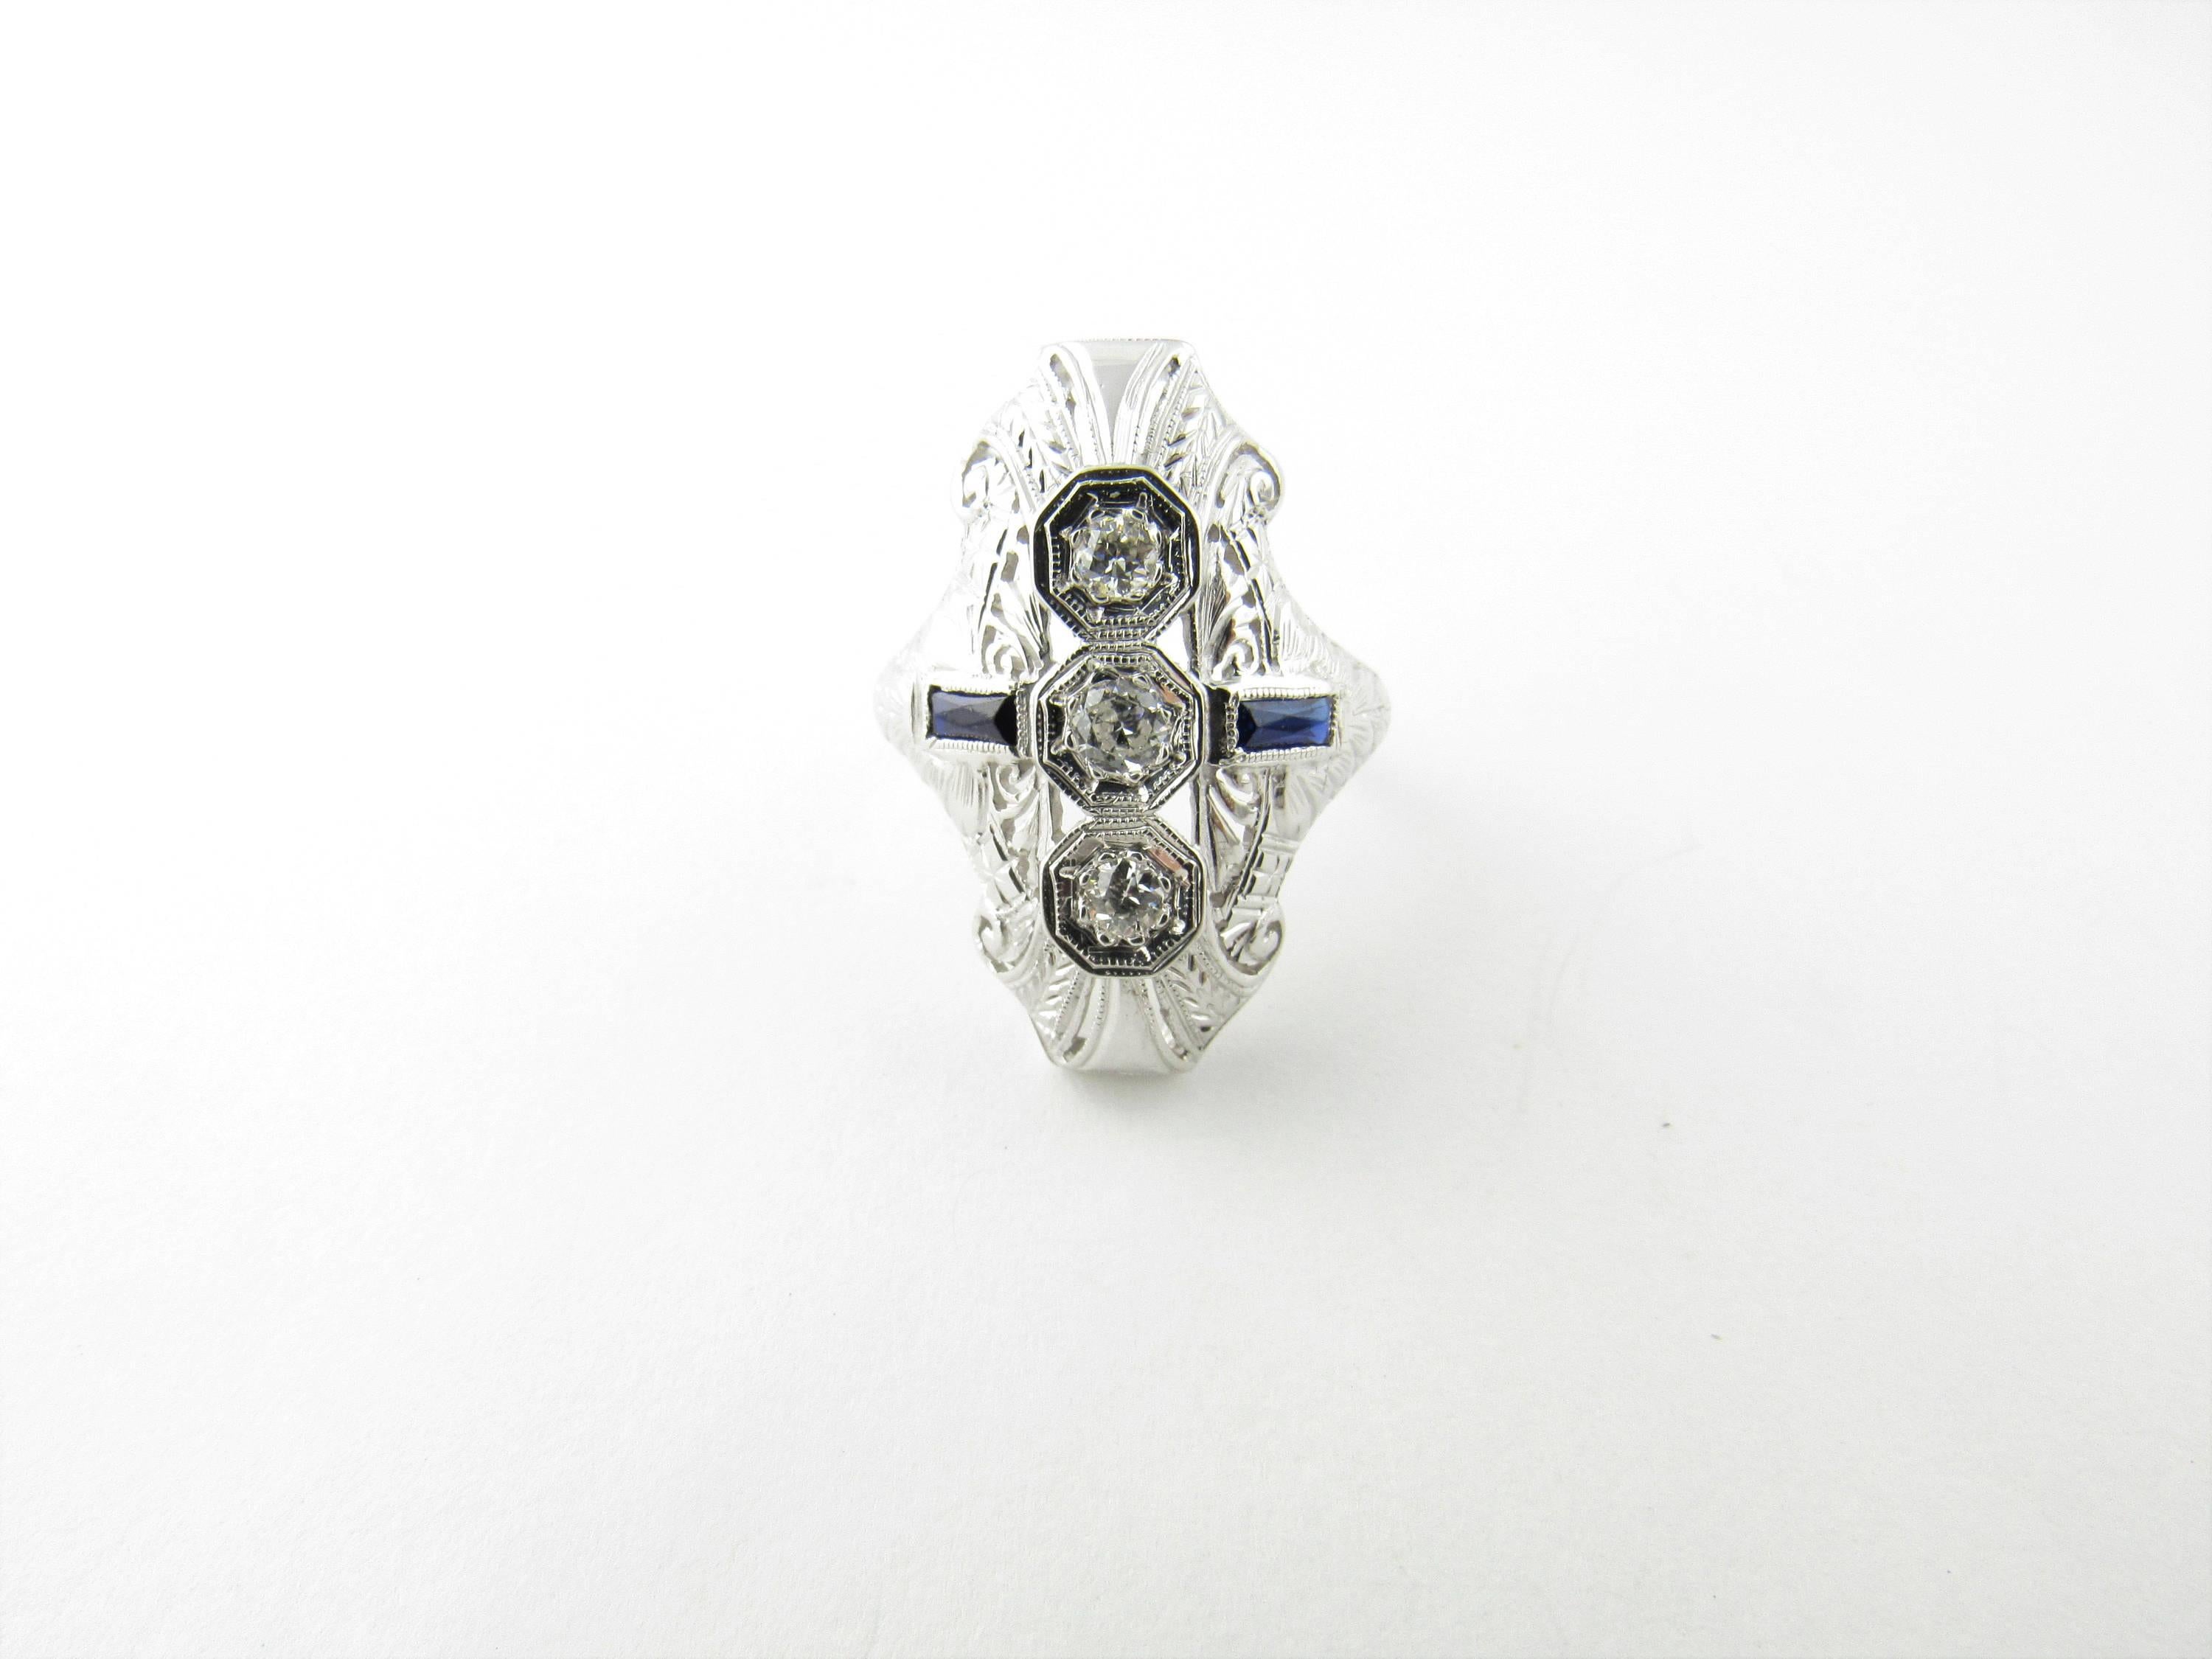 Vintage Art Deco 18K White Gold Diamond and Sapphire Ring Size 4.25 Front of ring is 24 mm in length and 14 mm across Back of band is 1.5 mm wide Ring contains 3 diamonds each about .25 carats for a total of .75 carats VS quality diamonds 2 blue